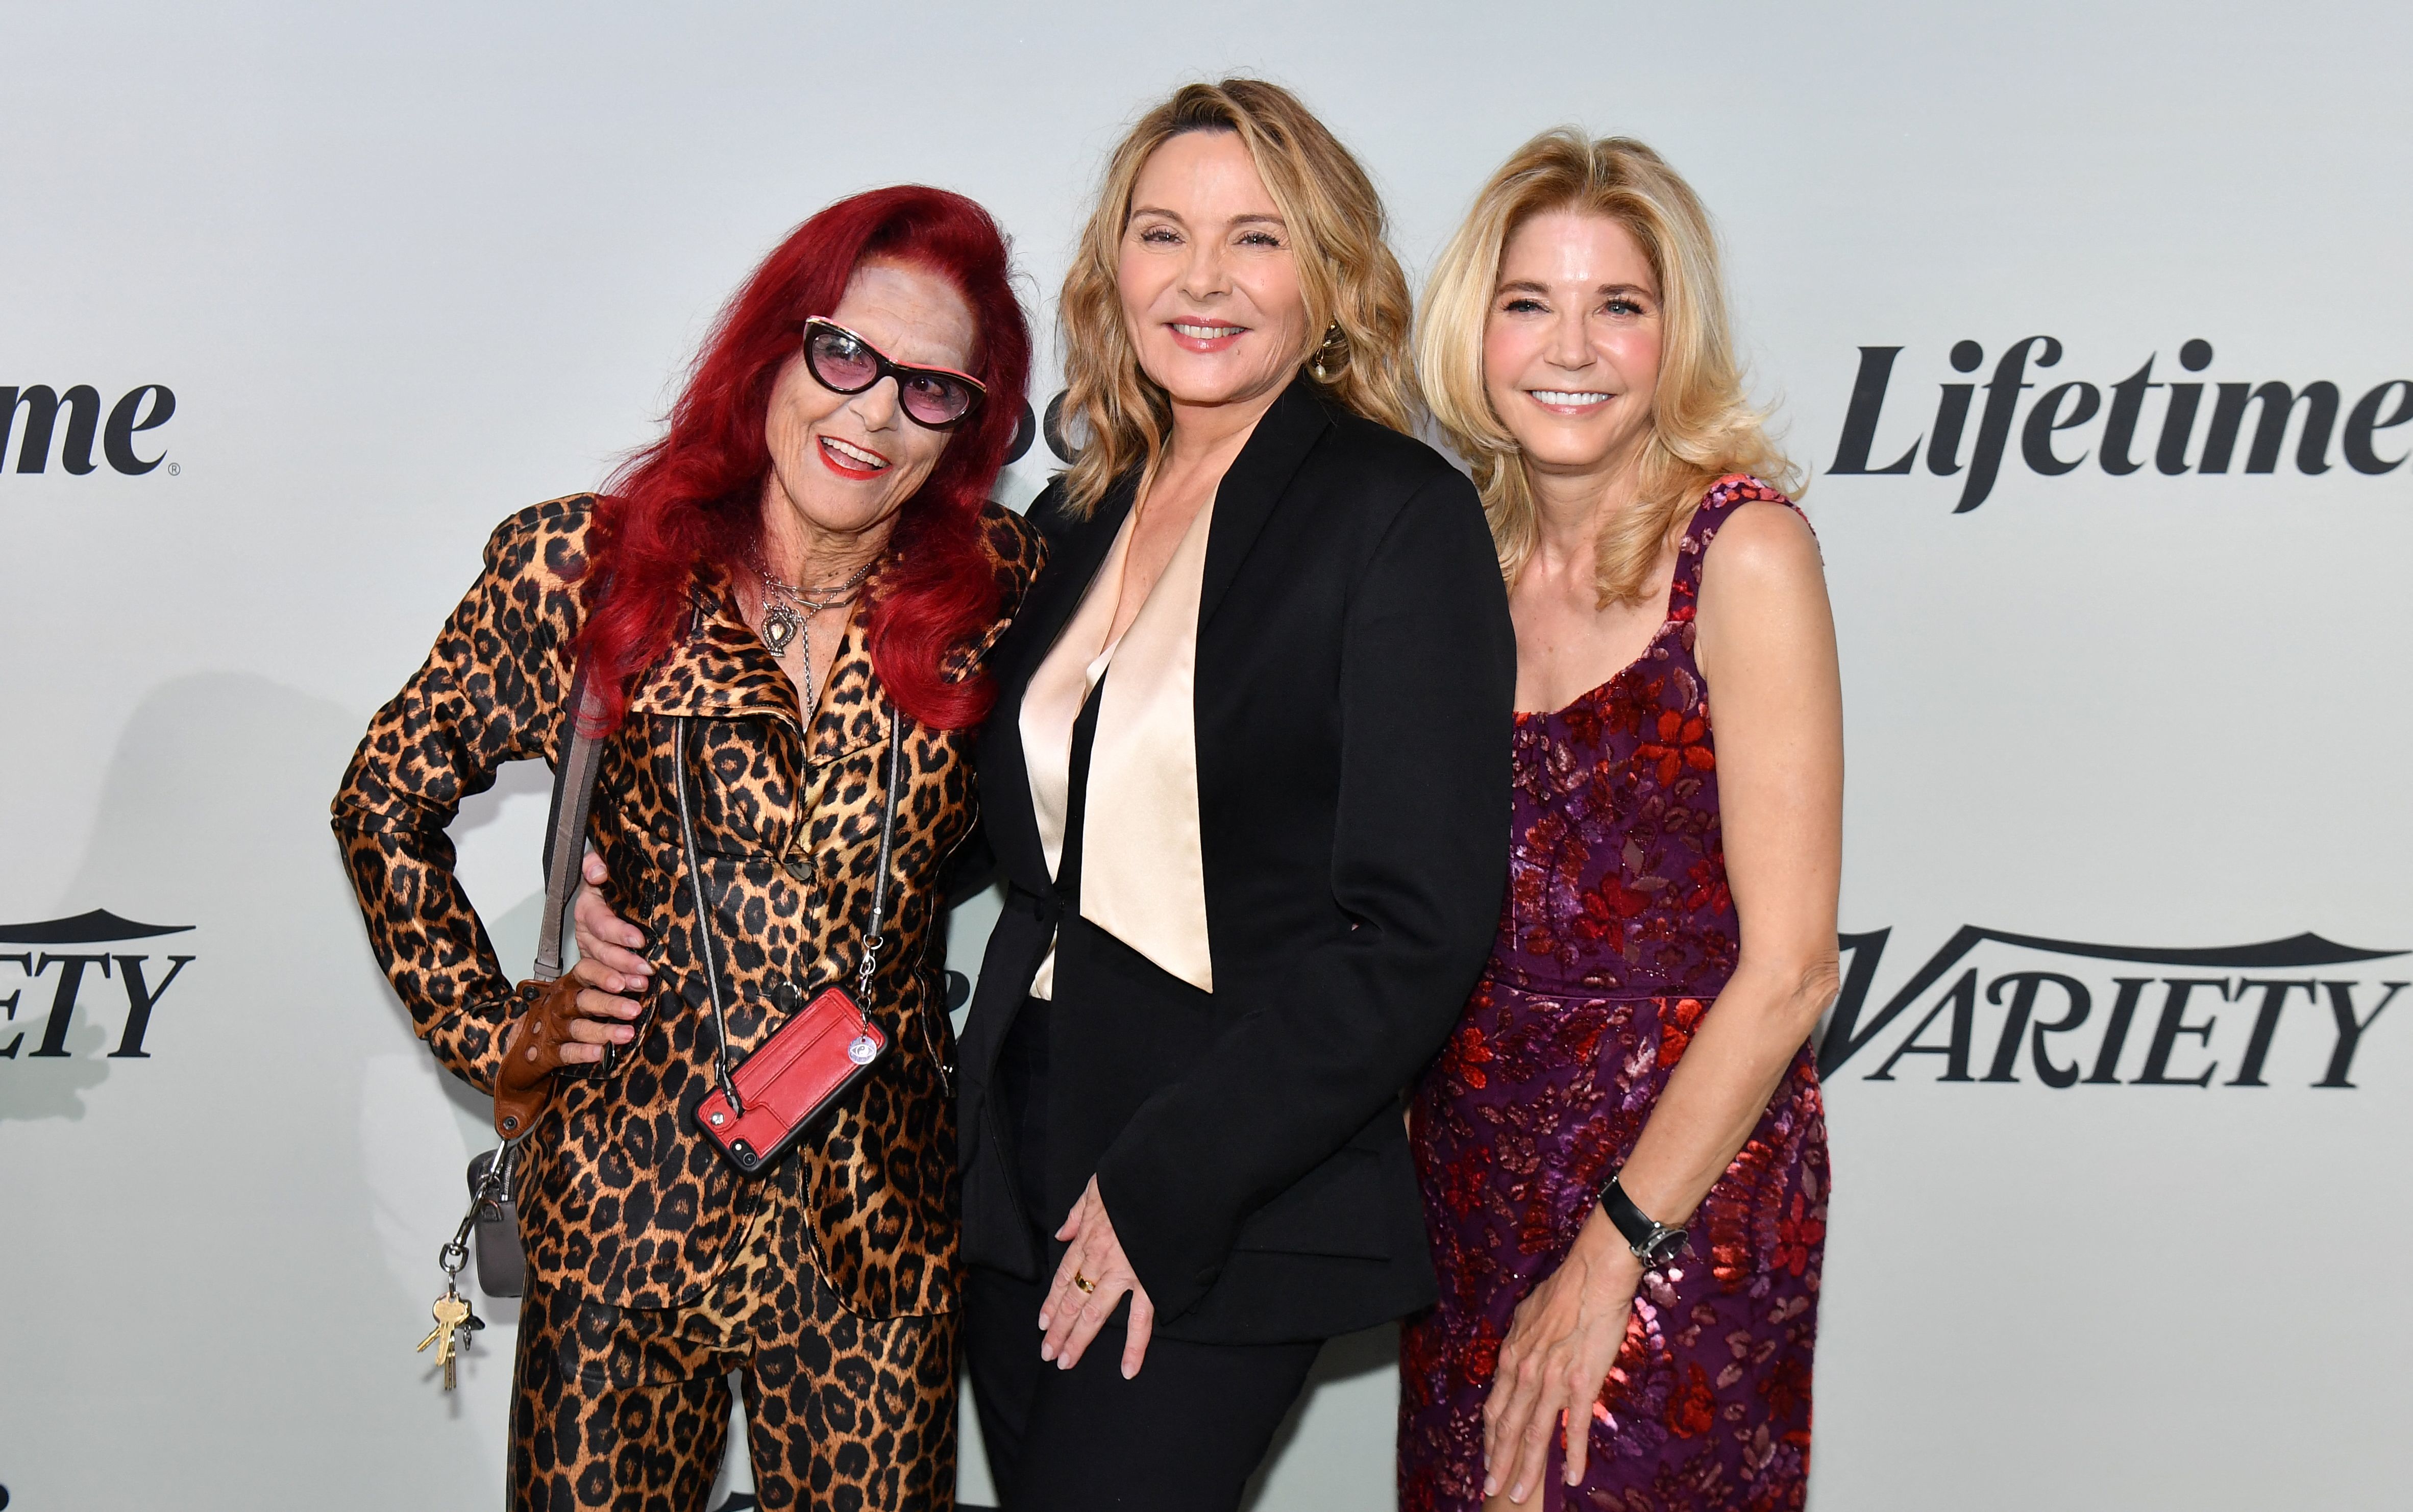 Candace Bushnell (R), actress Kim Cattrall (C) and costume designer Patricia Field (L) arrive for Variety's 2022 Power of Women at the Glasshouse in New York, May 5, 2022.